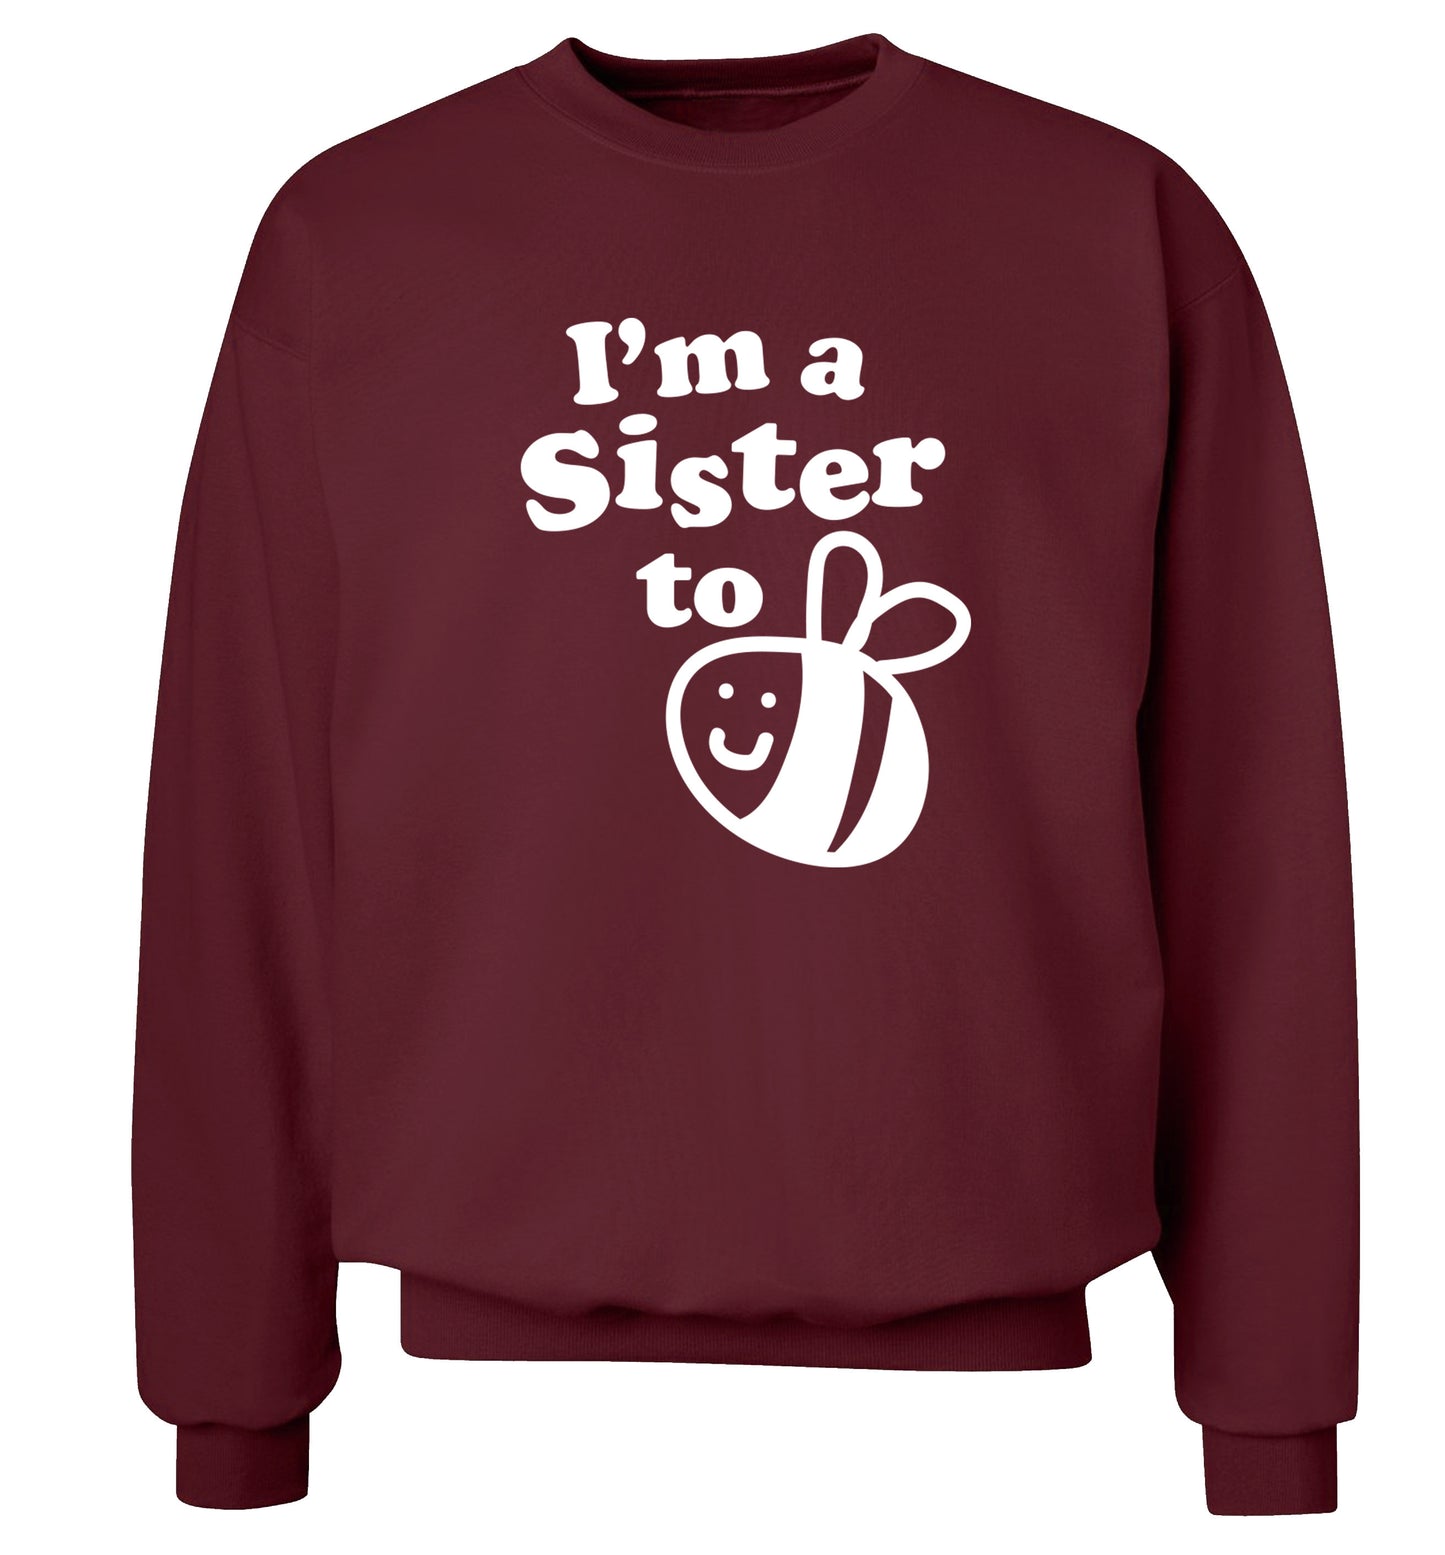 I'm a sister to be Adult's unisex maroon Sweater 2XL